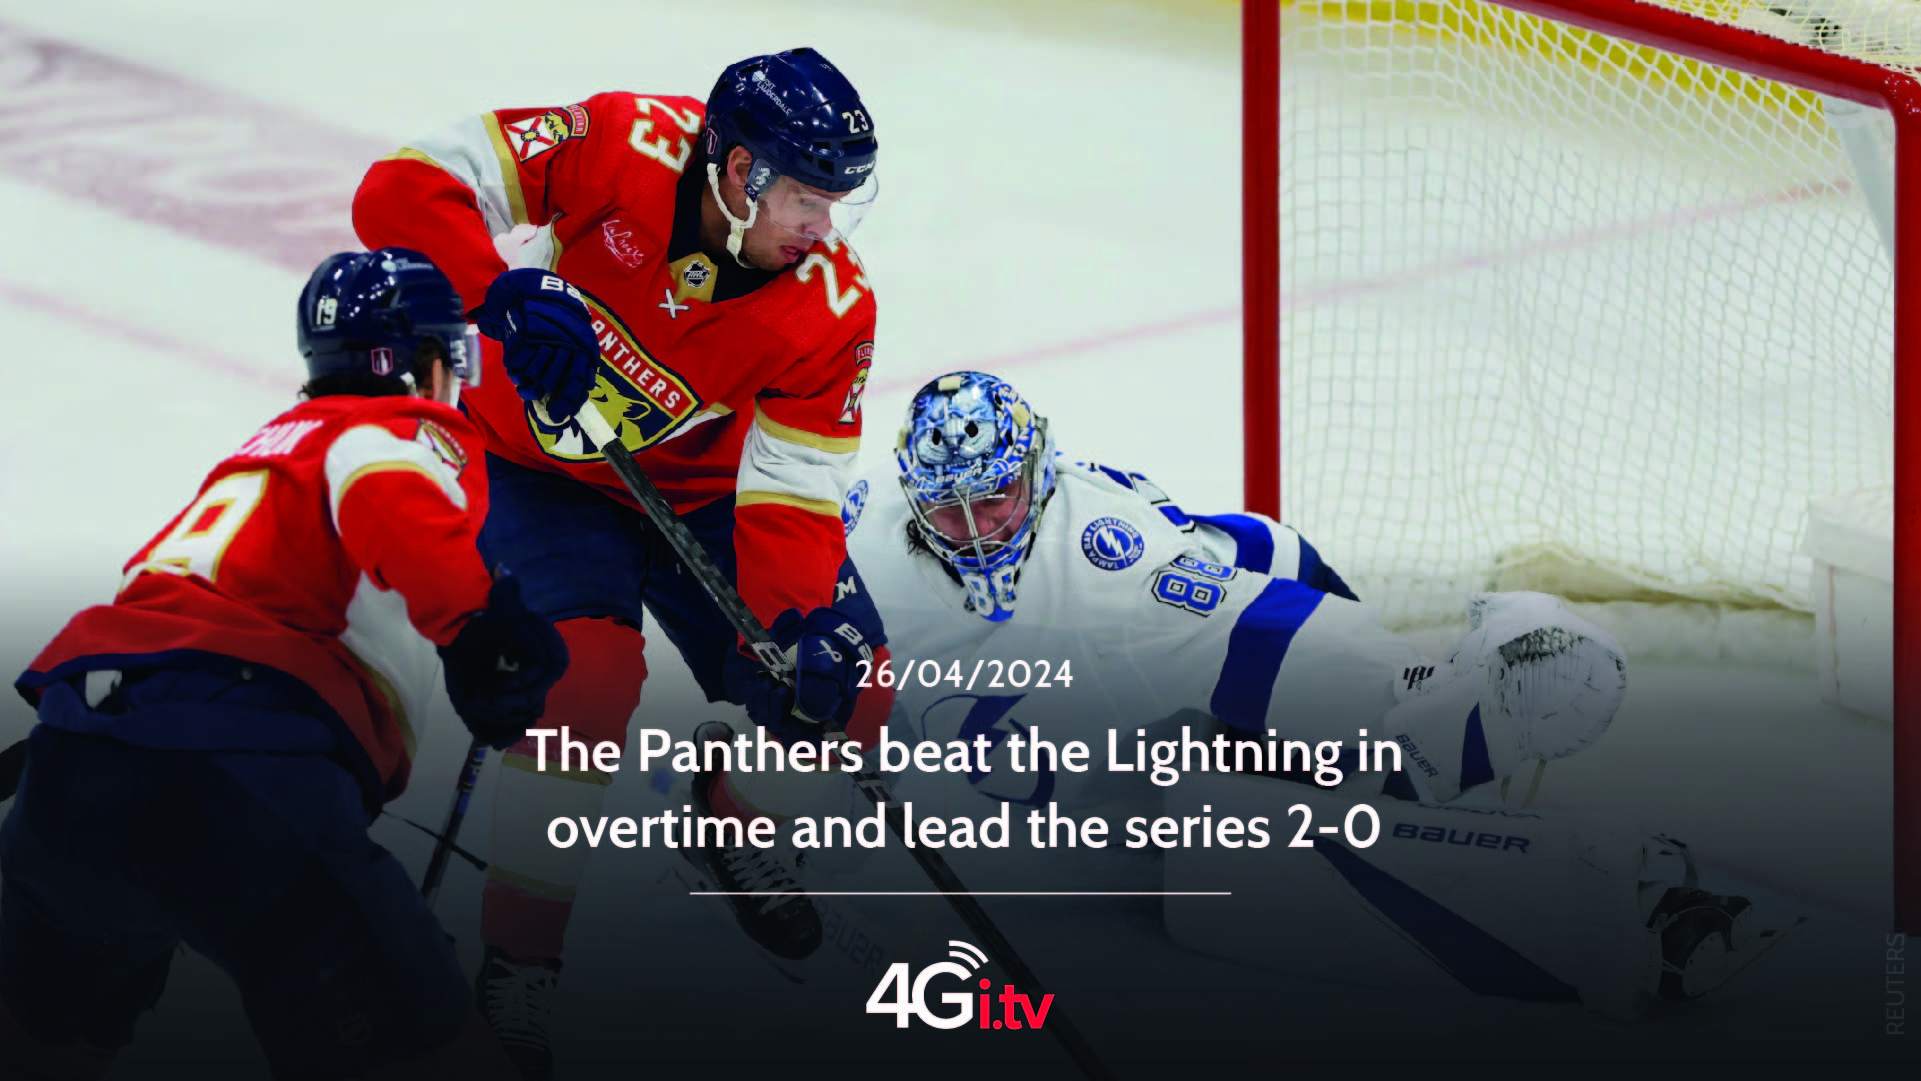 Lesen Sie mehr über den Artikel The Panthers beat the Lightning in overtime and lead the series 2-0 